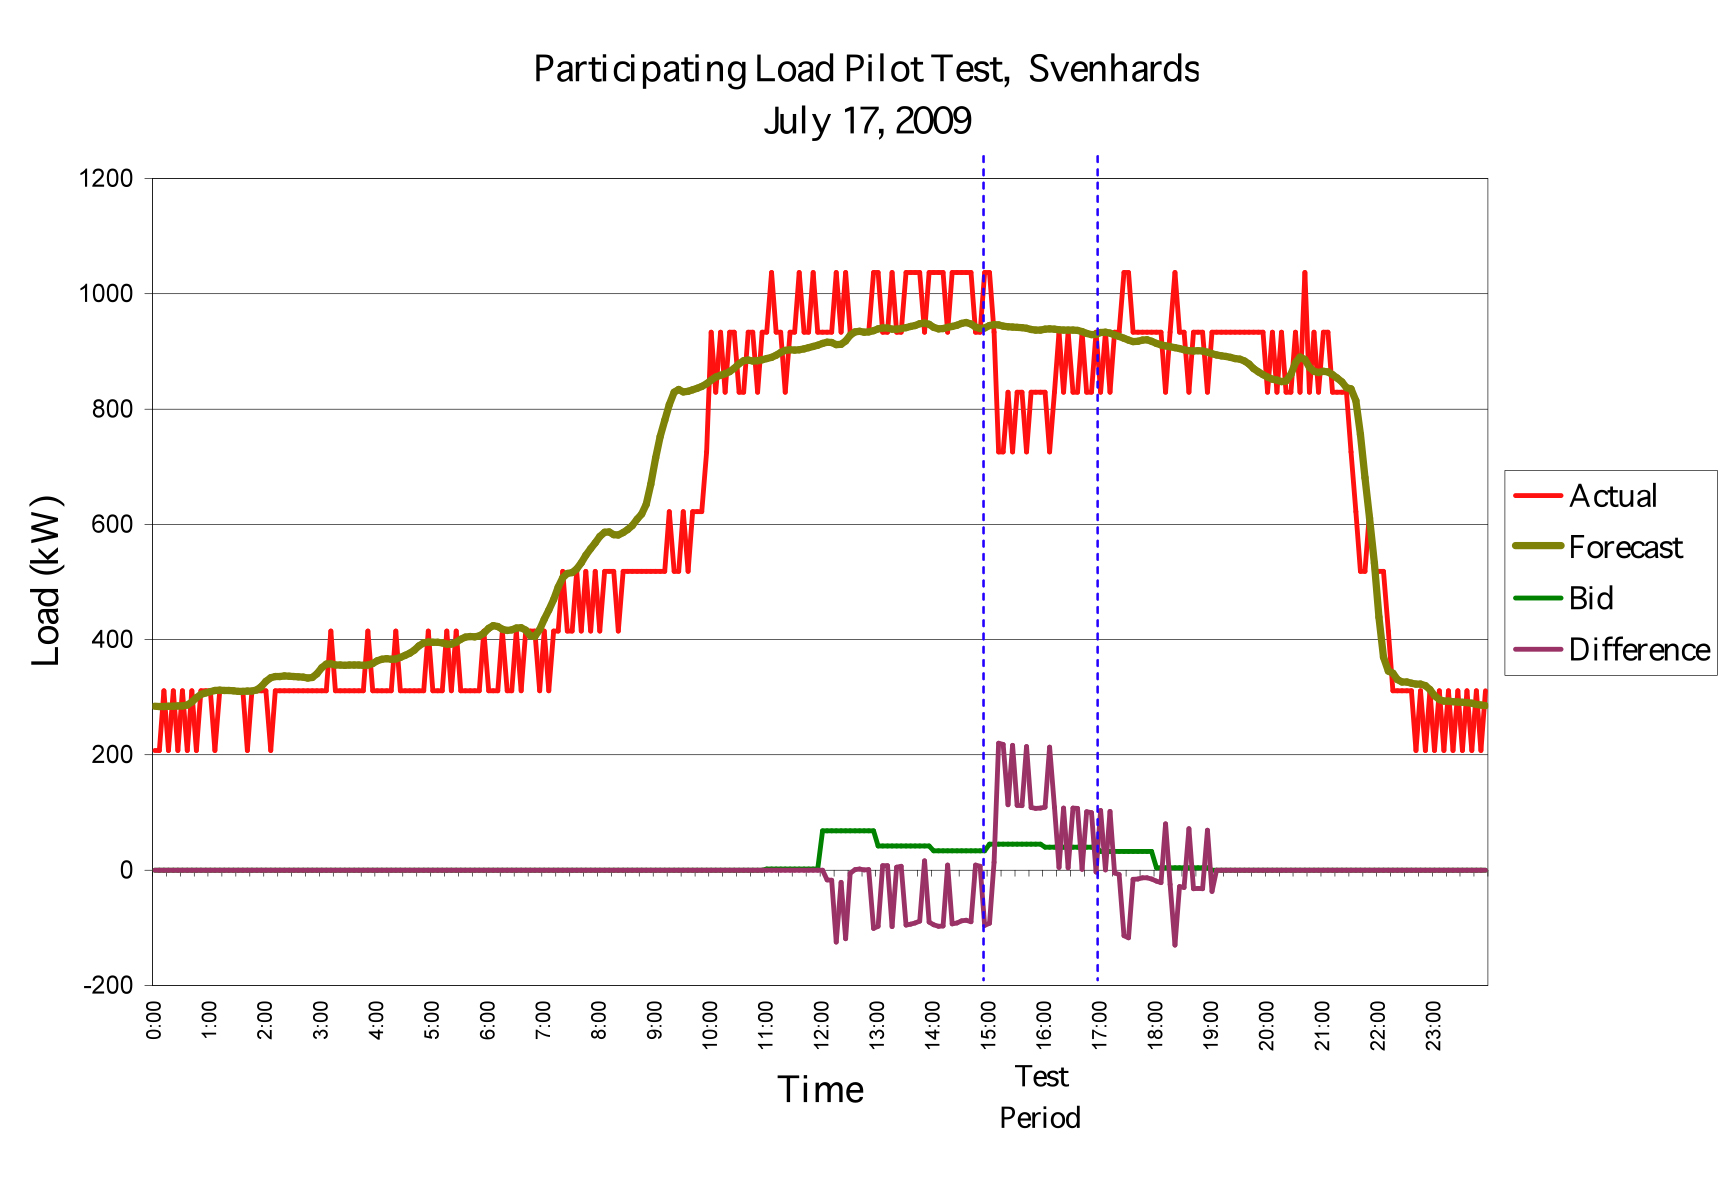 The figure shows a typical result of a reduction in power use in a facility. The actual power use is in red, the forecast in yellow, the bids for power savings in the wholesale market in green, and the actual reduction in power use in black. The time interval is 3 pm to 4 pm.